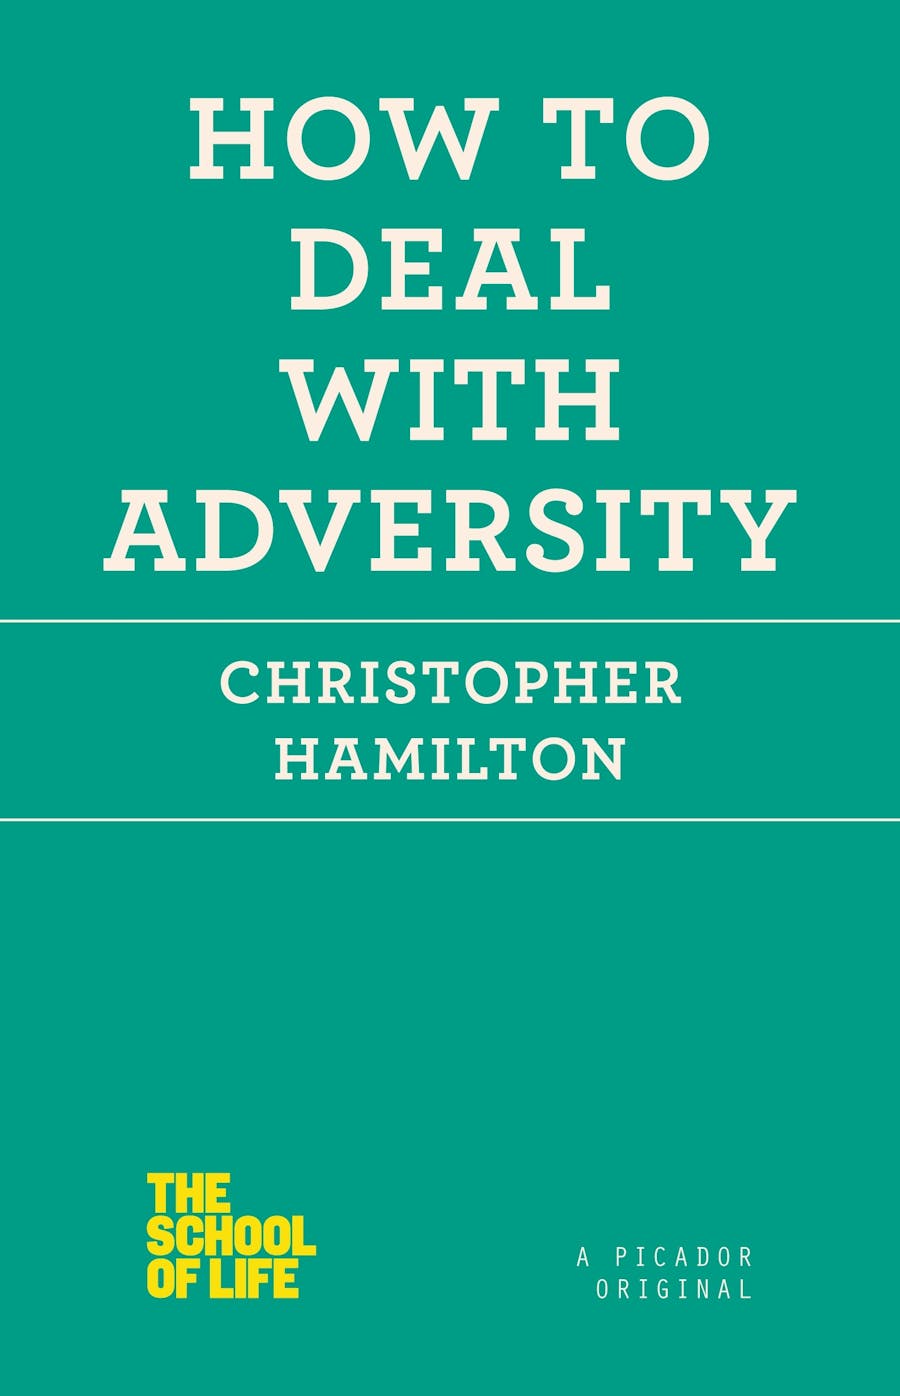 How to Deal with Adversity by Christopher Hamilton